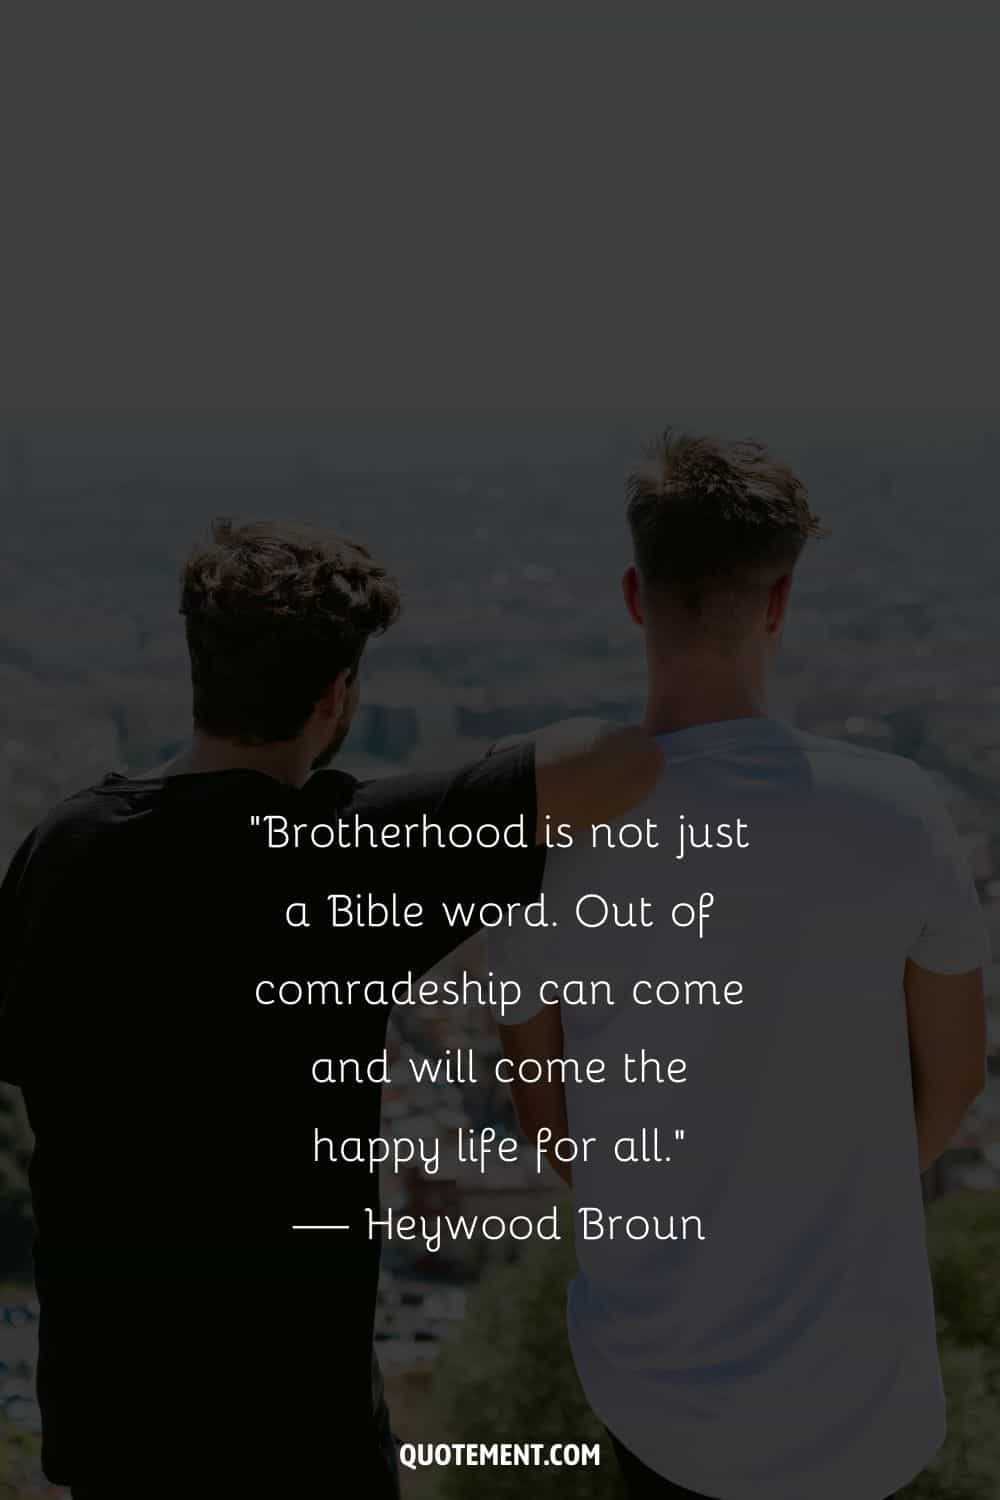 “Brotherhood is not just a Bible word. Out of comradeship can come and will come the happy life for all.” — Heywood Broun